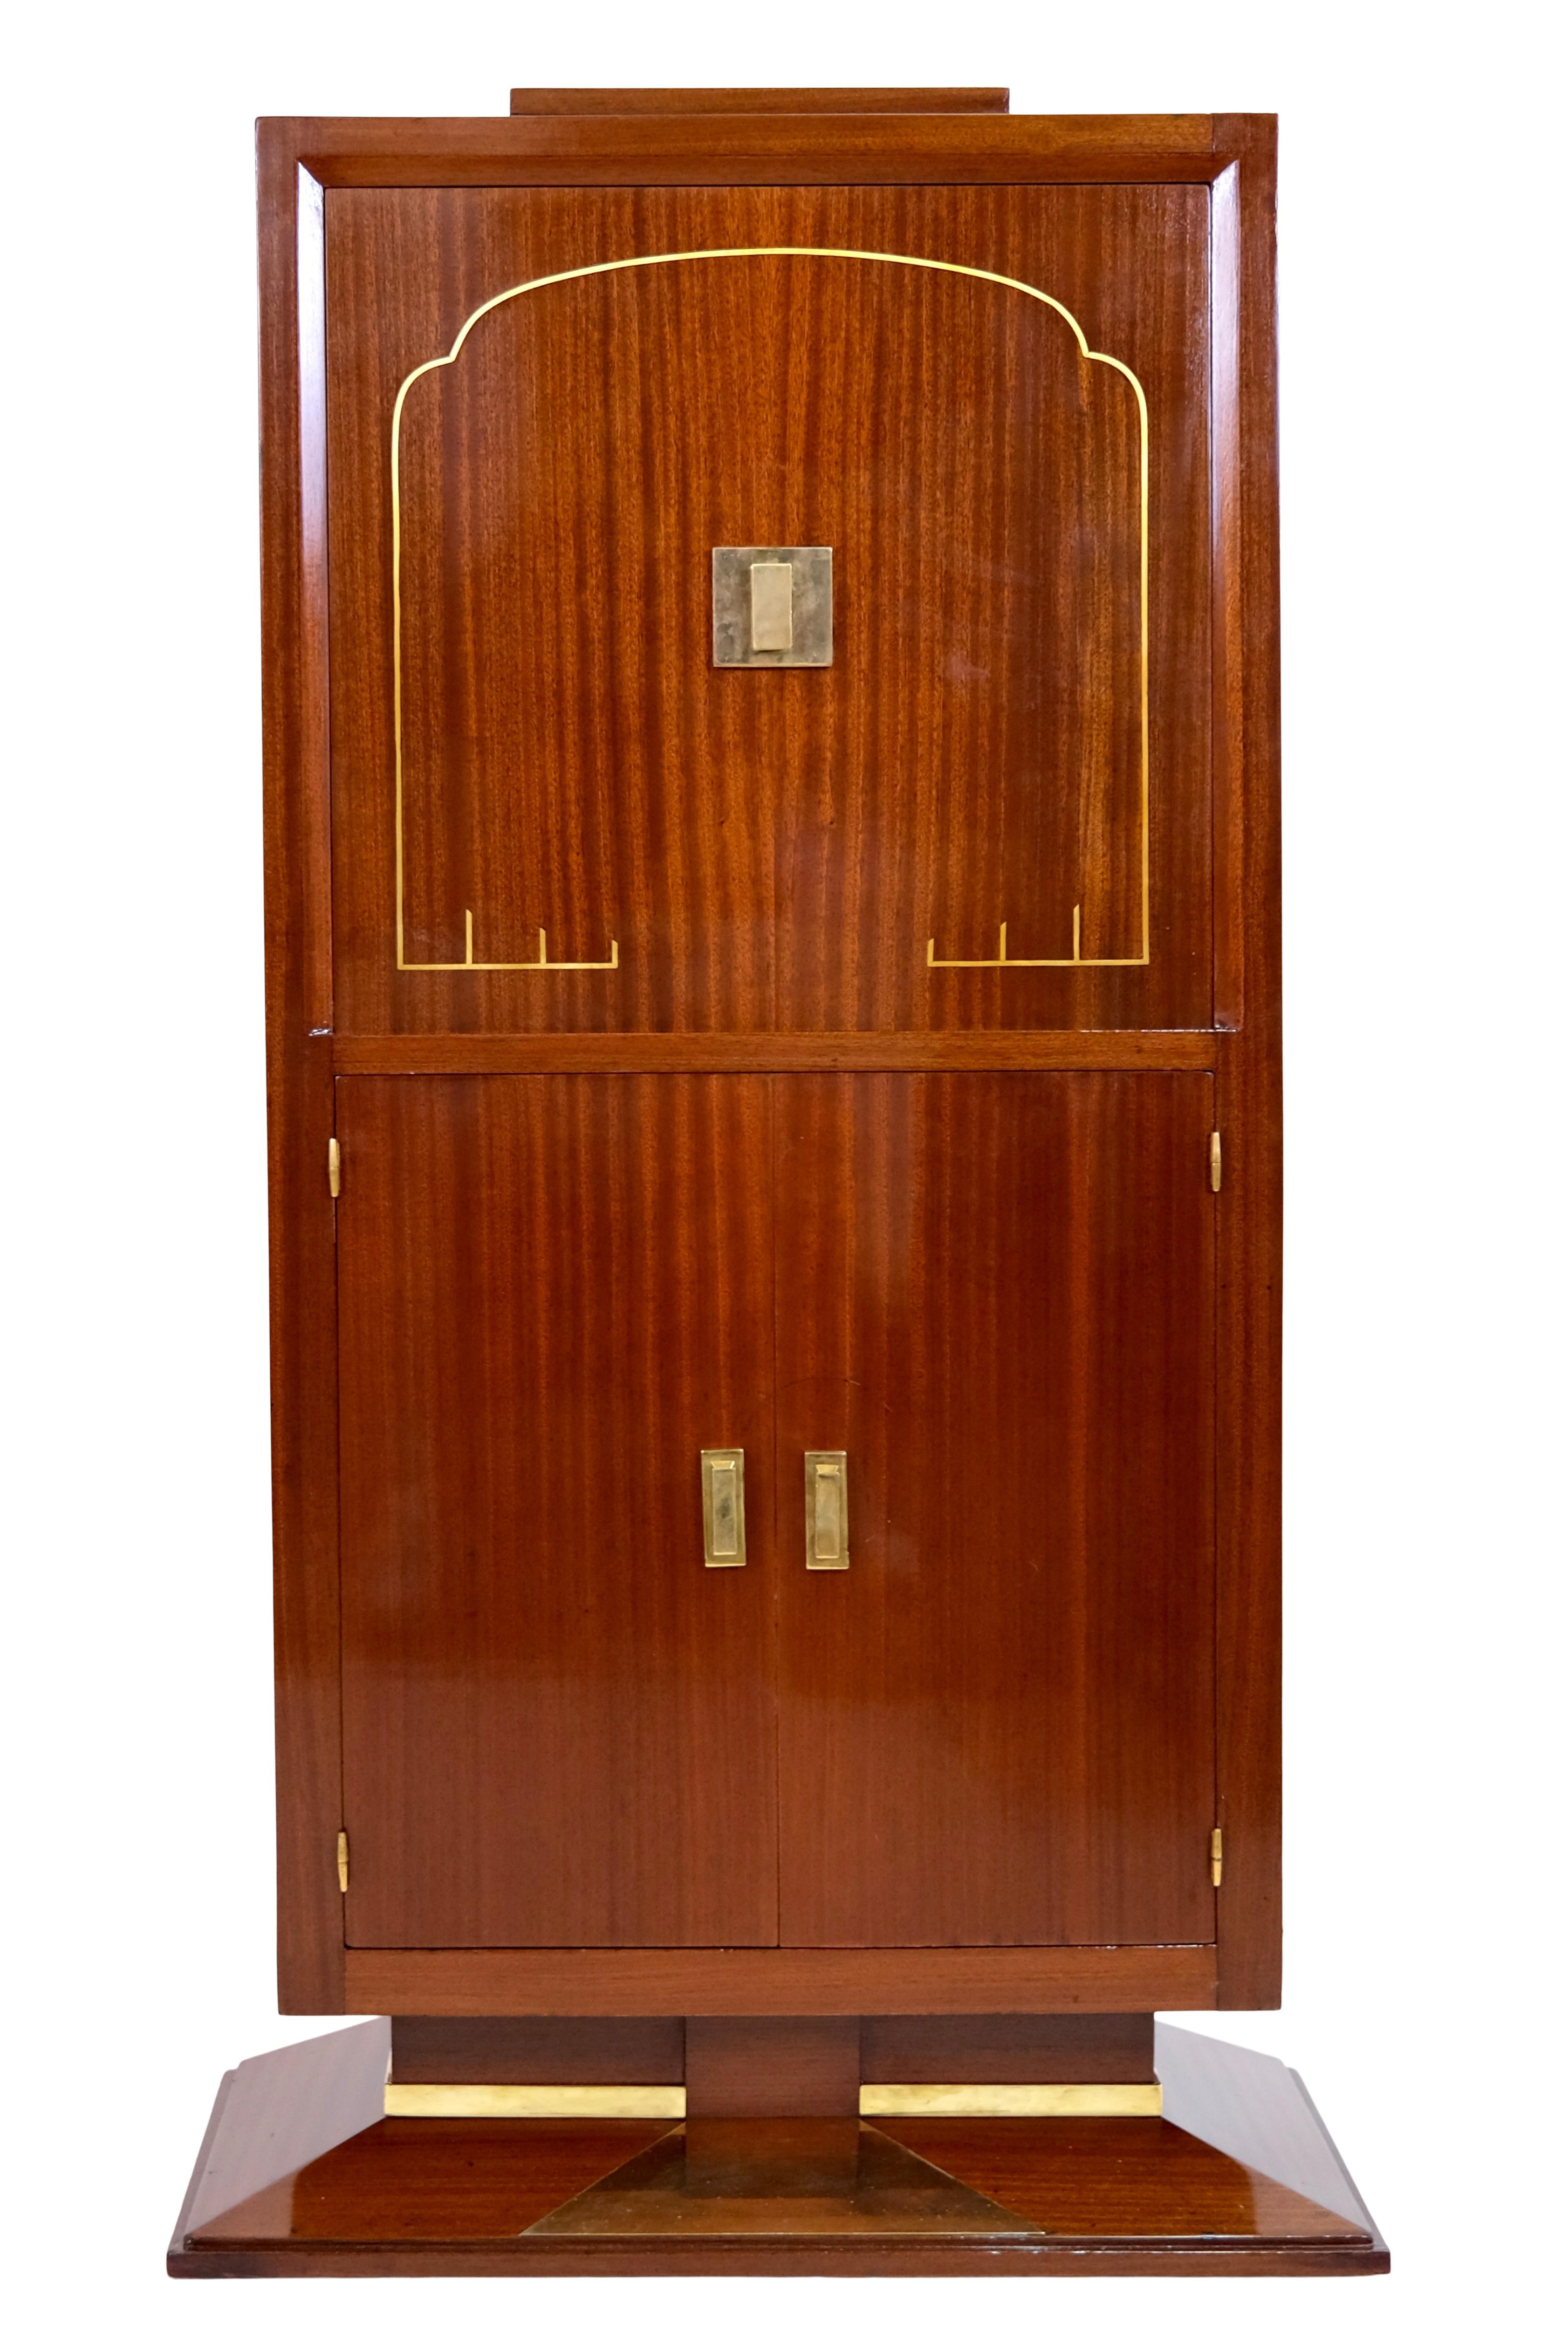 Art Deco Secretary
attributed to Maison Dominique 
Mahogany, shellac hand polished

Keyhole in the fitting

Original Art Deco, France 1930s

Dimensions:
Width, body: 60 cm
Width, base: 72 cm
Height: 131 cm
Depth, base: 30 cm
Depth, base: 36 cm